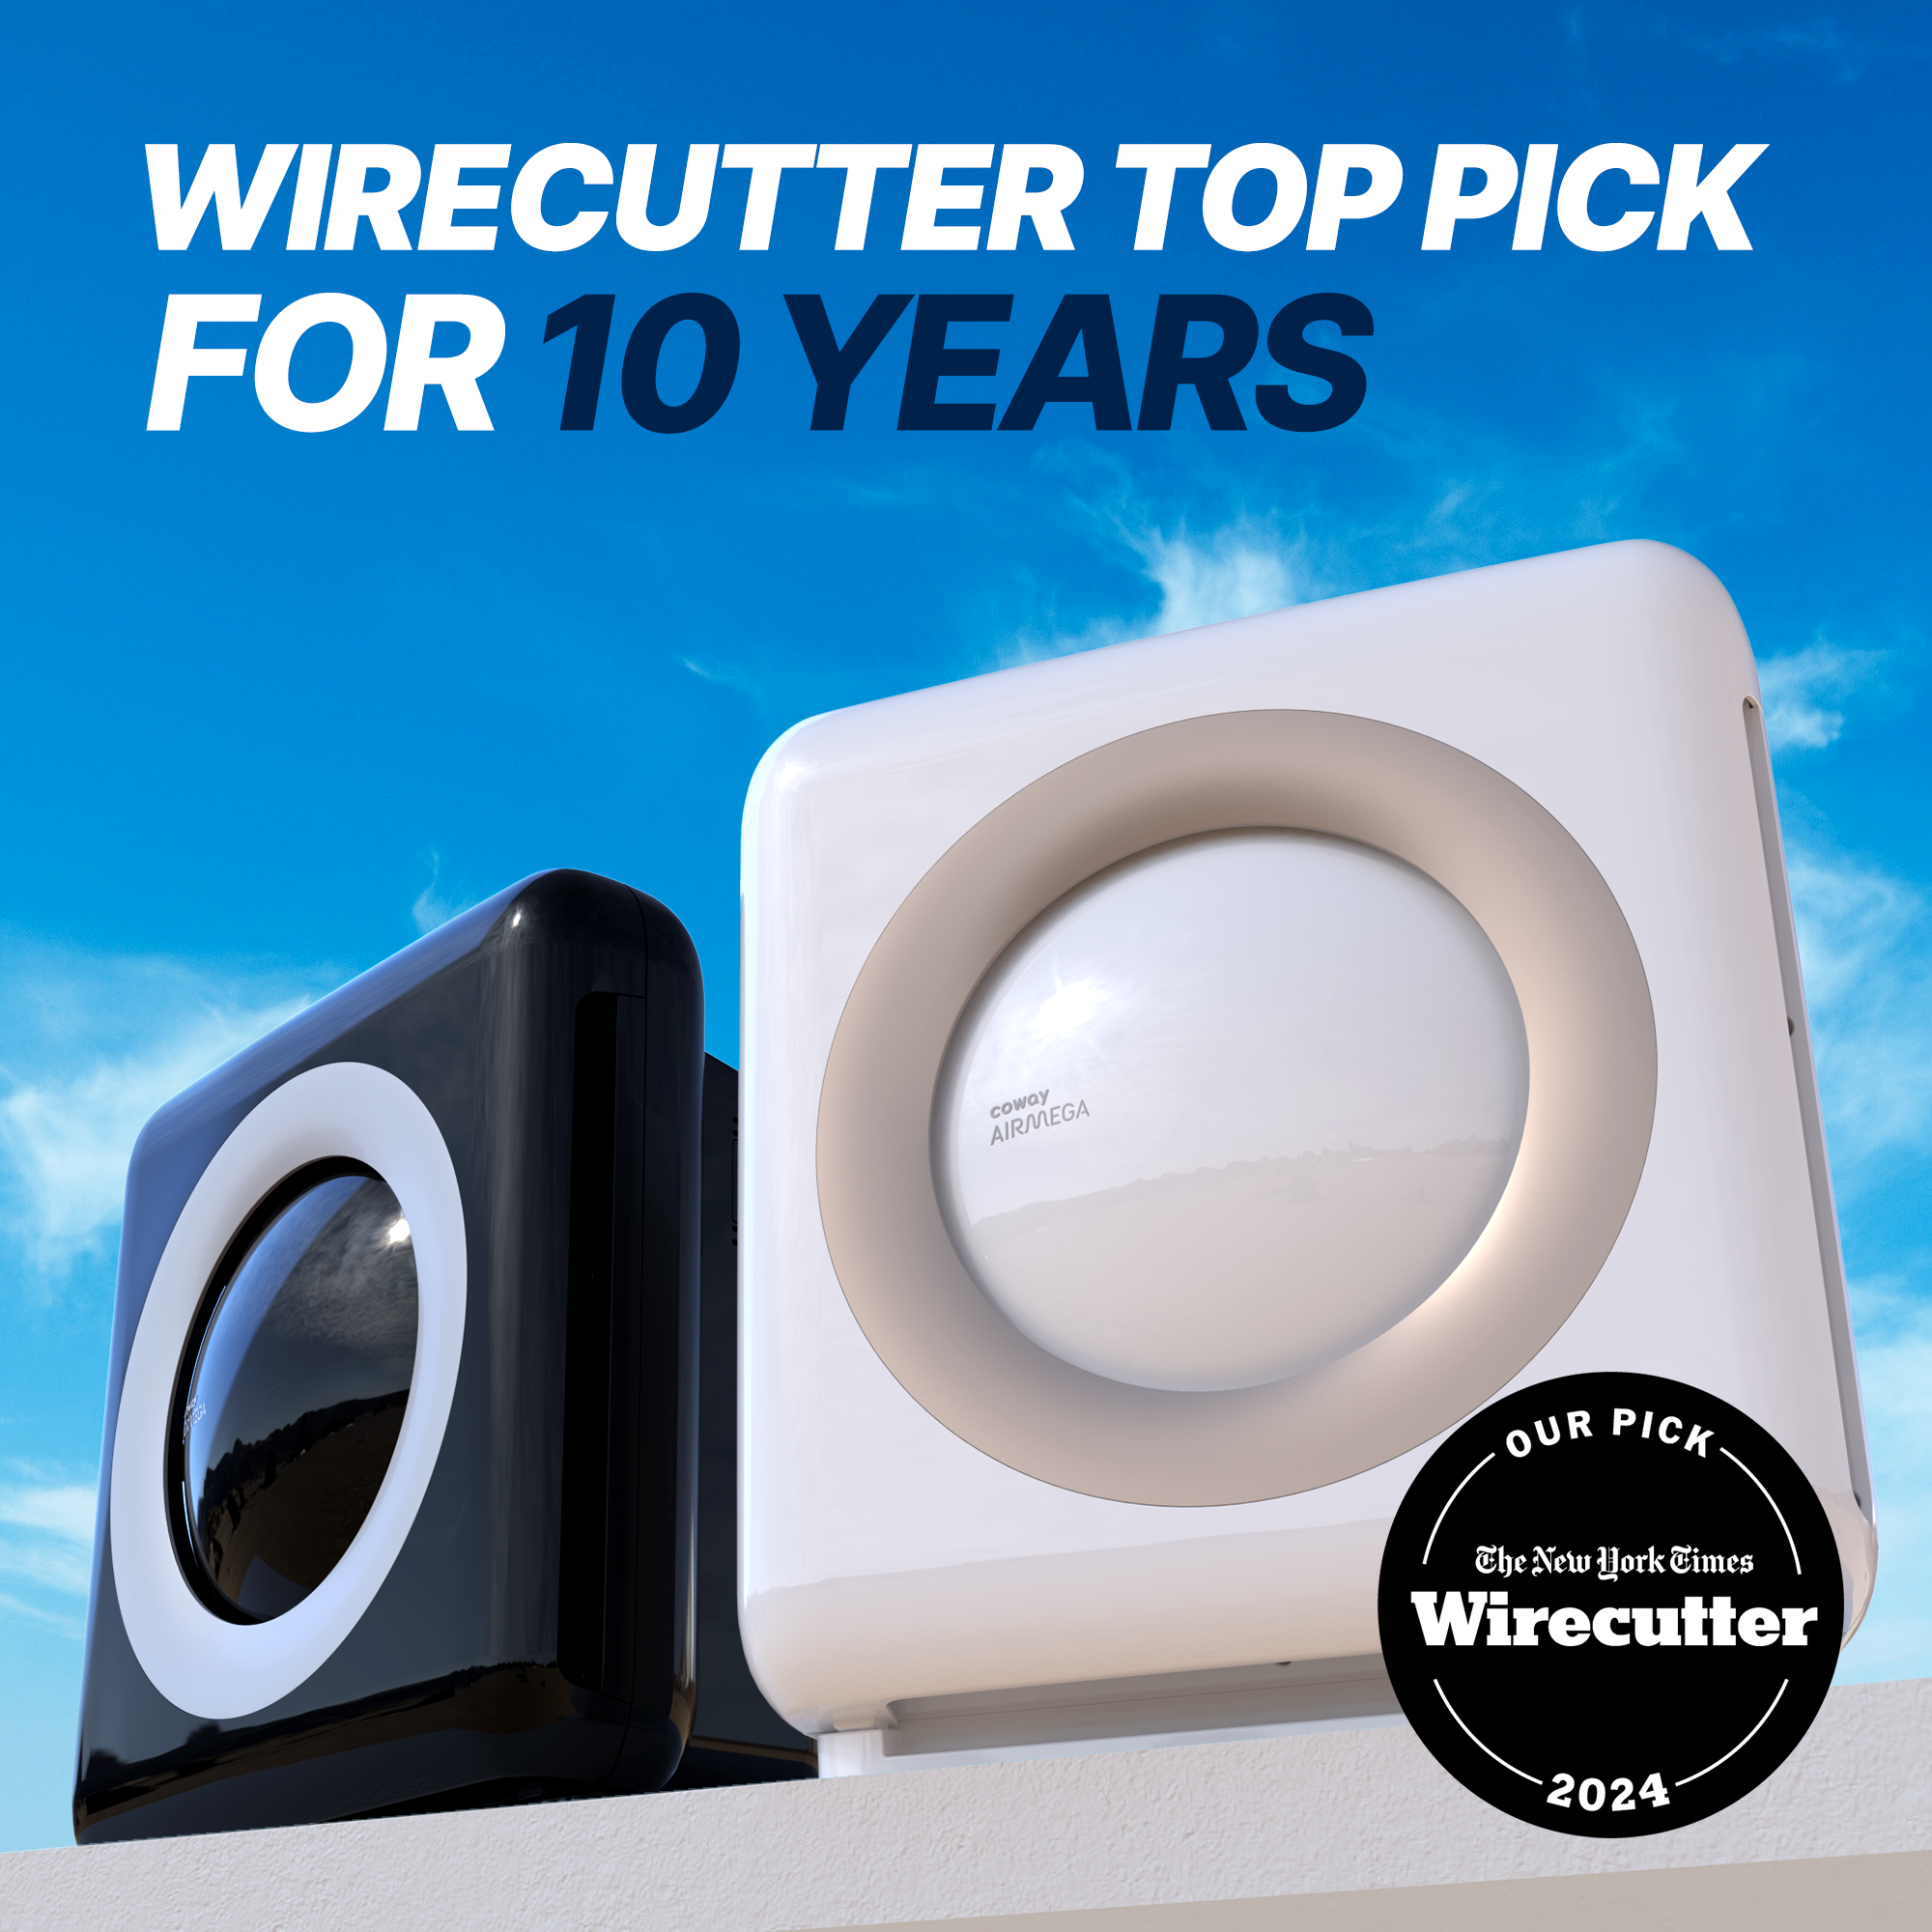 Wirecutter top pick for 10 years